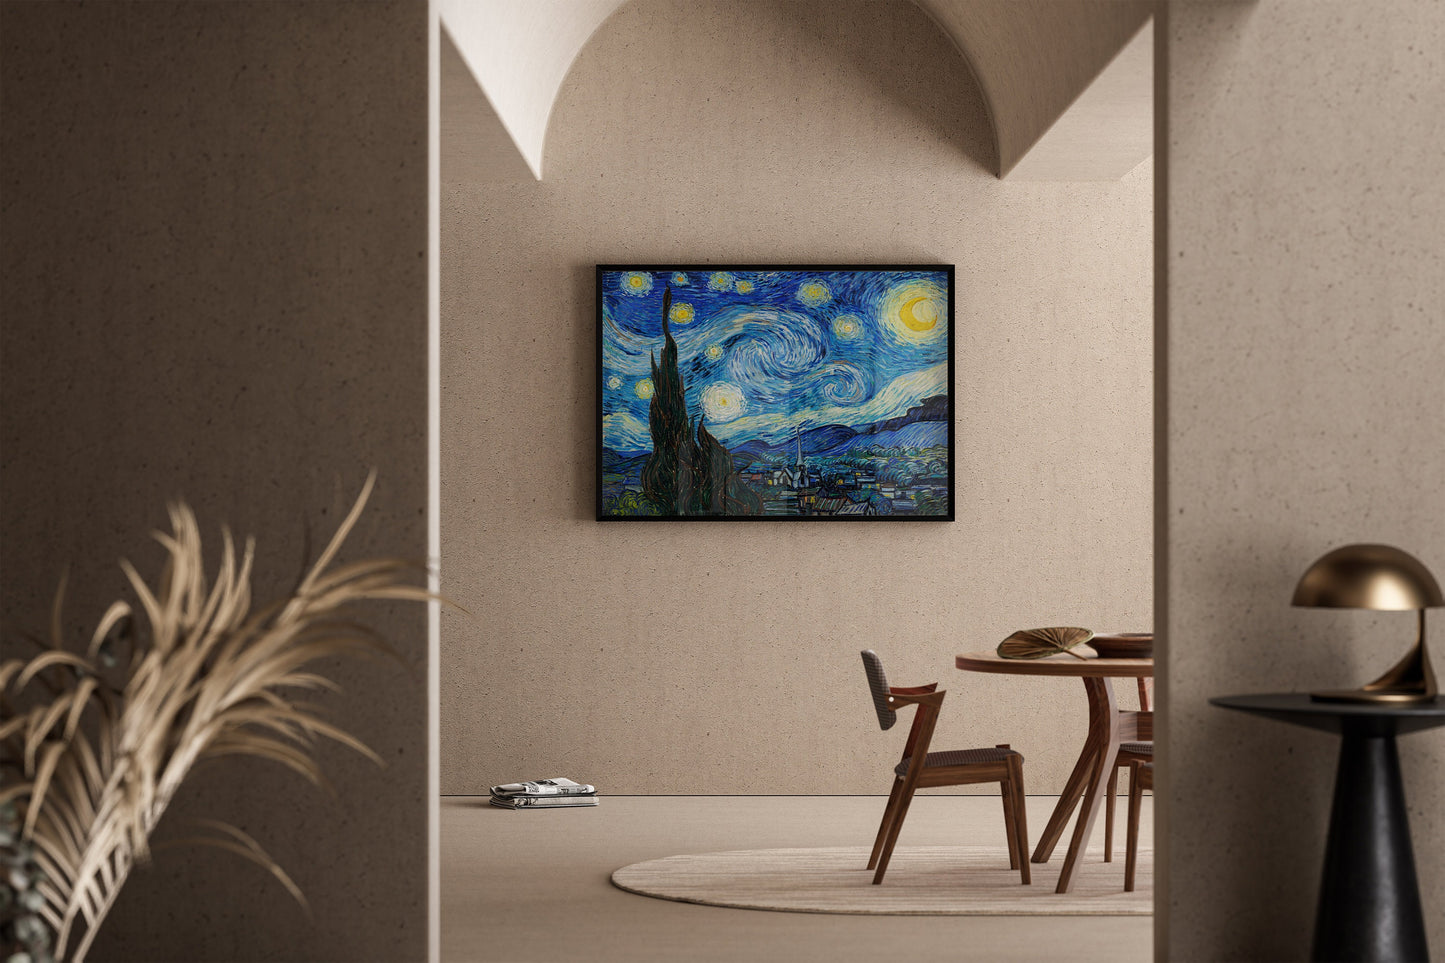 Vincent Van Gogh - Starry Night | Iconic Classic Impressionist Fine Art Print (available framed or unframed)